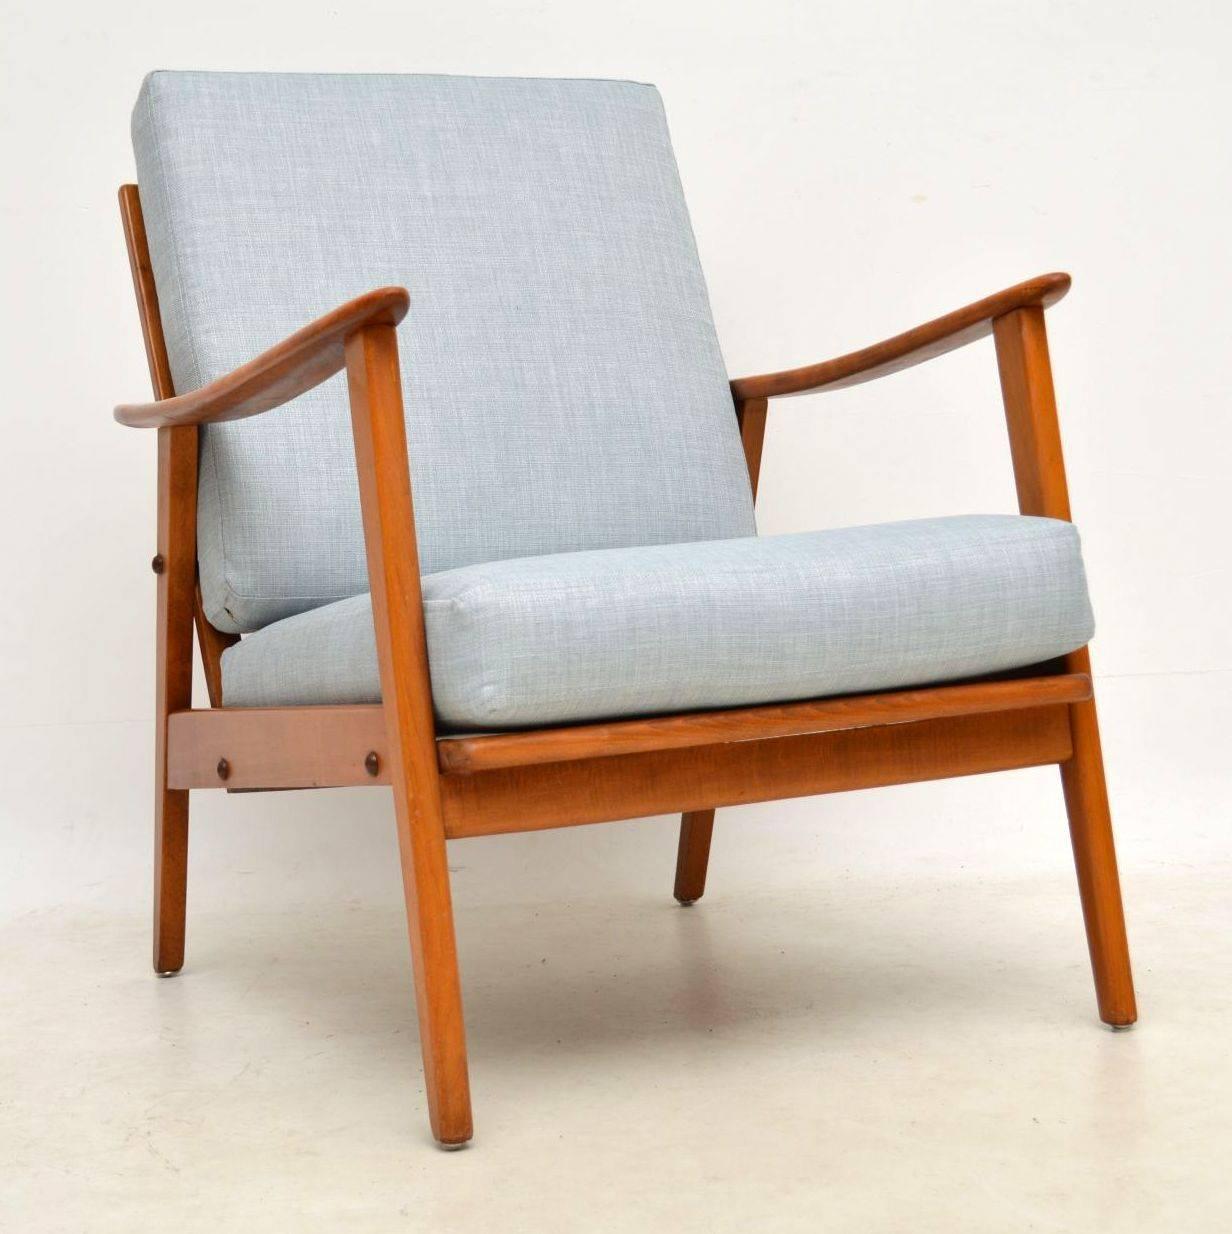 A beautifully styled and very comfortable vintage Danish armchair, this dates from the 1960s. It’s in great condition for its age, the frame is clean, sturdy and sound, with only some extremely minor wear. We have had the cushions newly made and